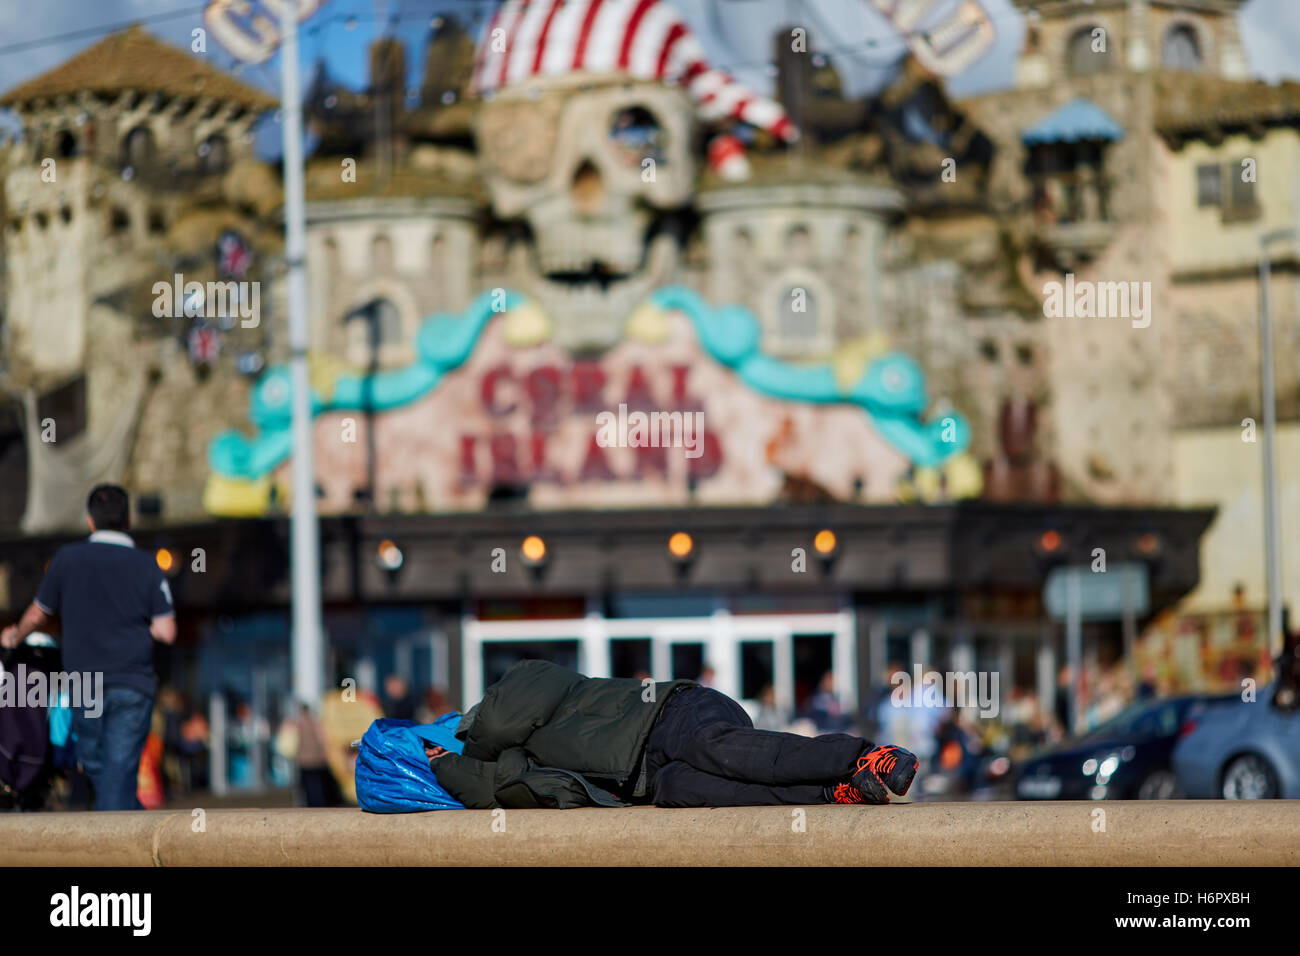 Blackpool sleeping tramp homeless   Holiday sea side town resort Lancashire tourist attractions person with belongings in bag sl Stock Photo